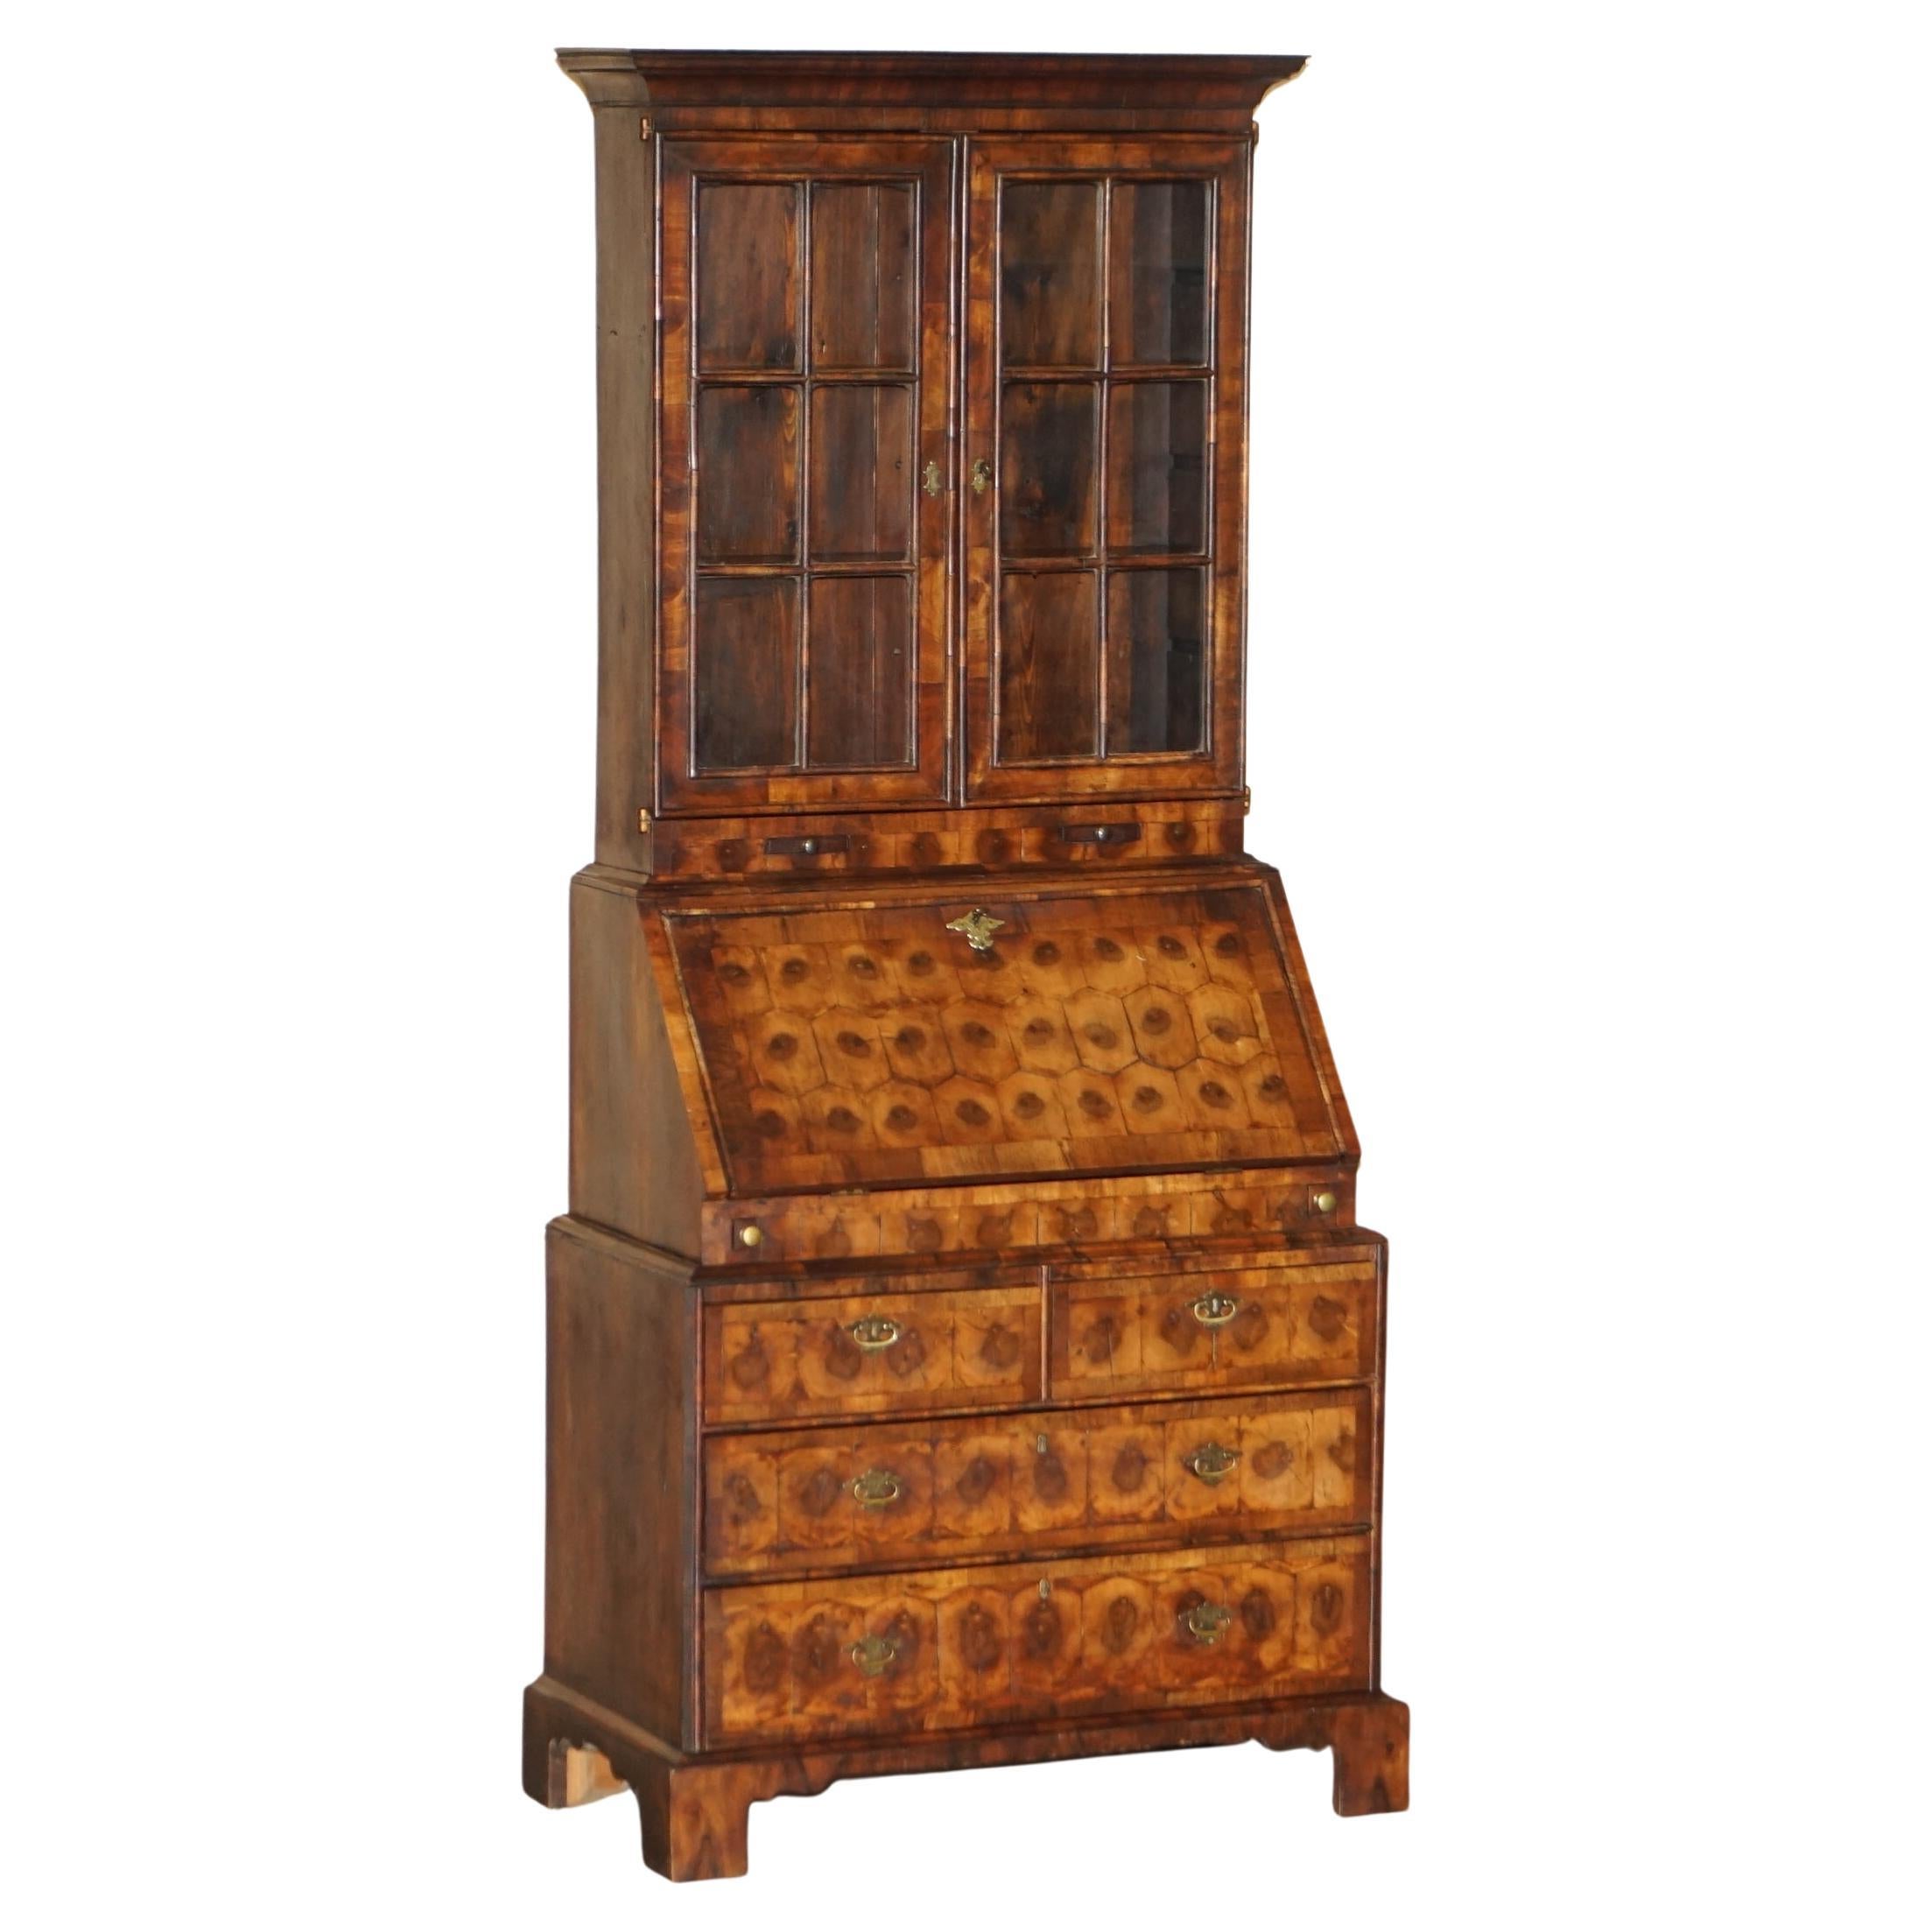 Fine Antique Georgian circa 1780 Oyster Venner Bureau Bookcase Chest of Drawers For Sale